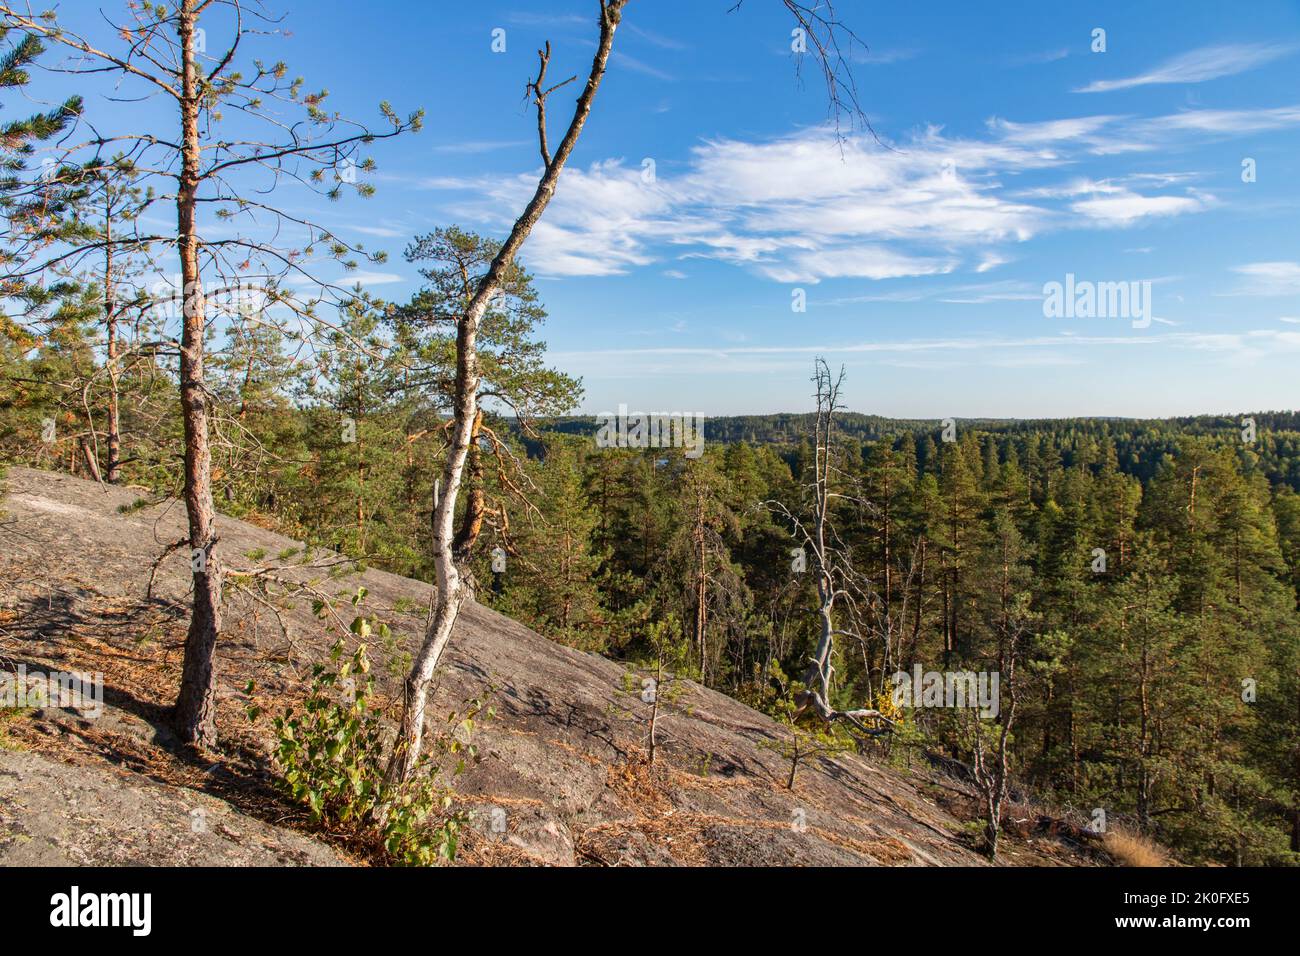 Natural landscape in Nuuksio national park in Finland Stock Photo